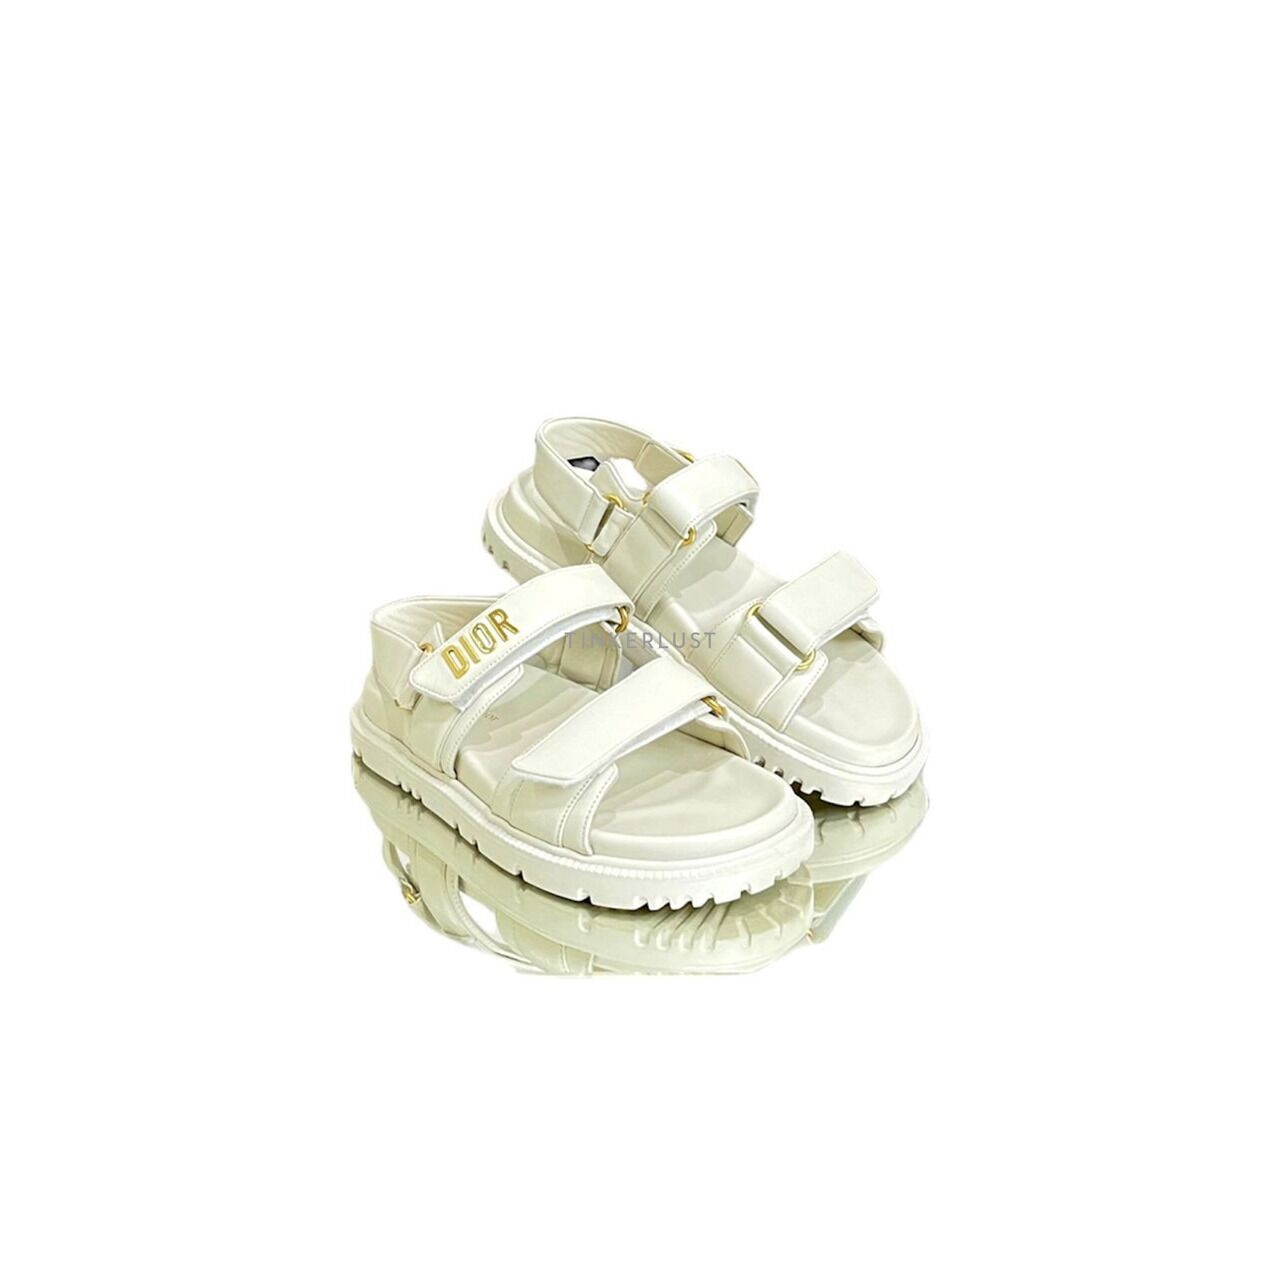 Christian Dior Dioract Ivory GHW 2023 Sandals